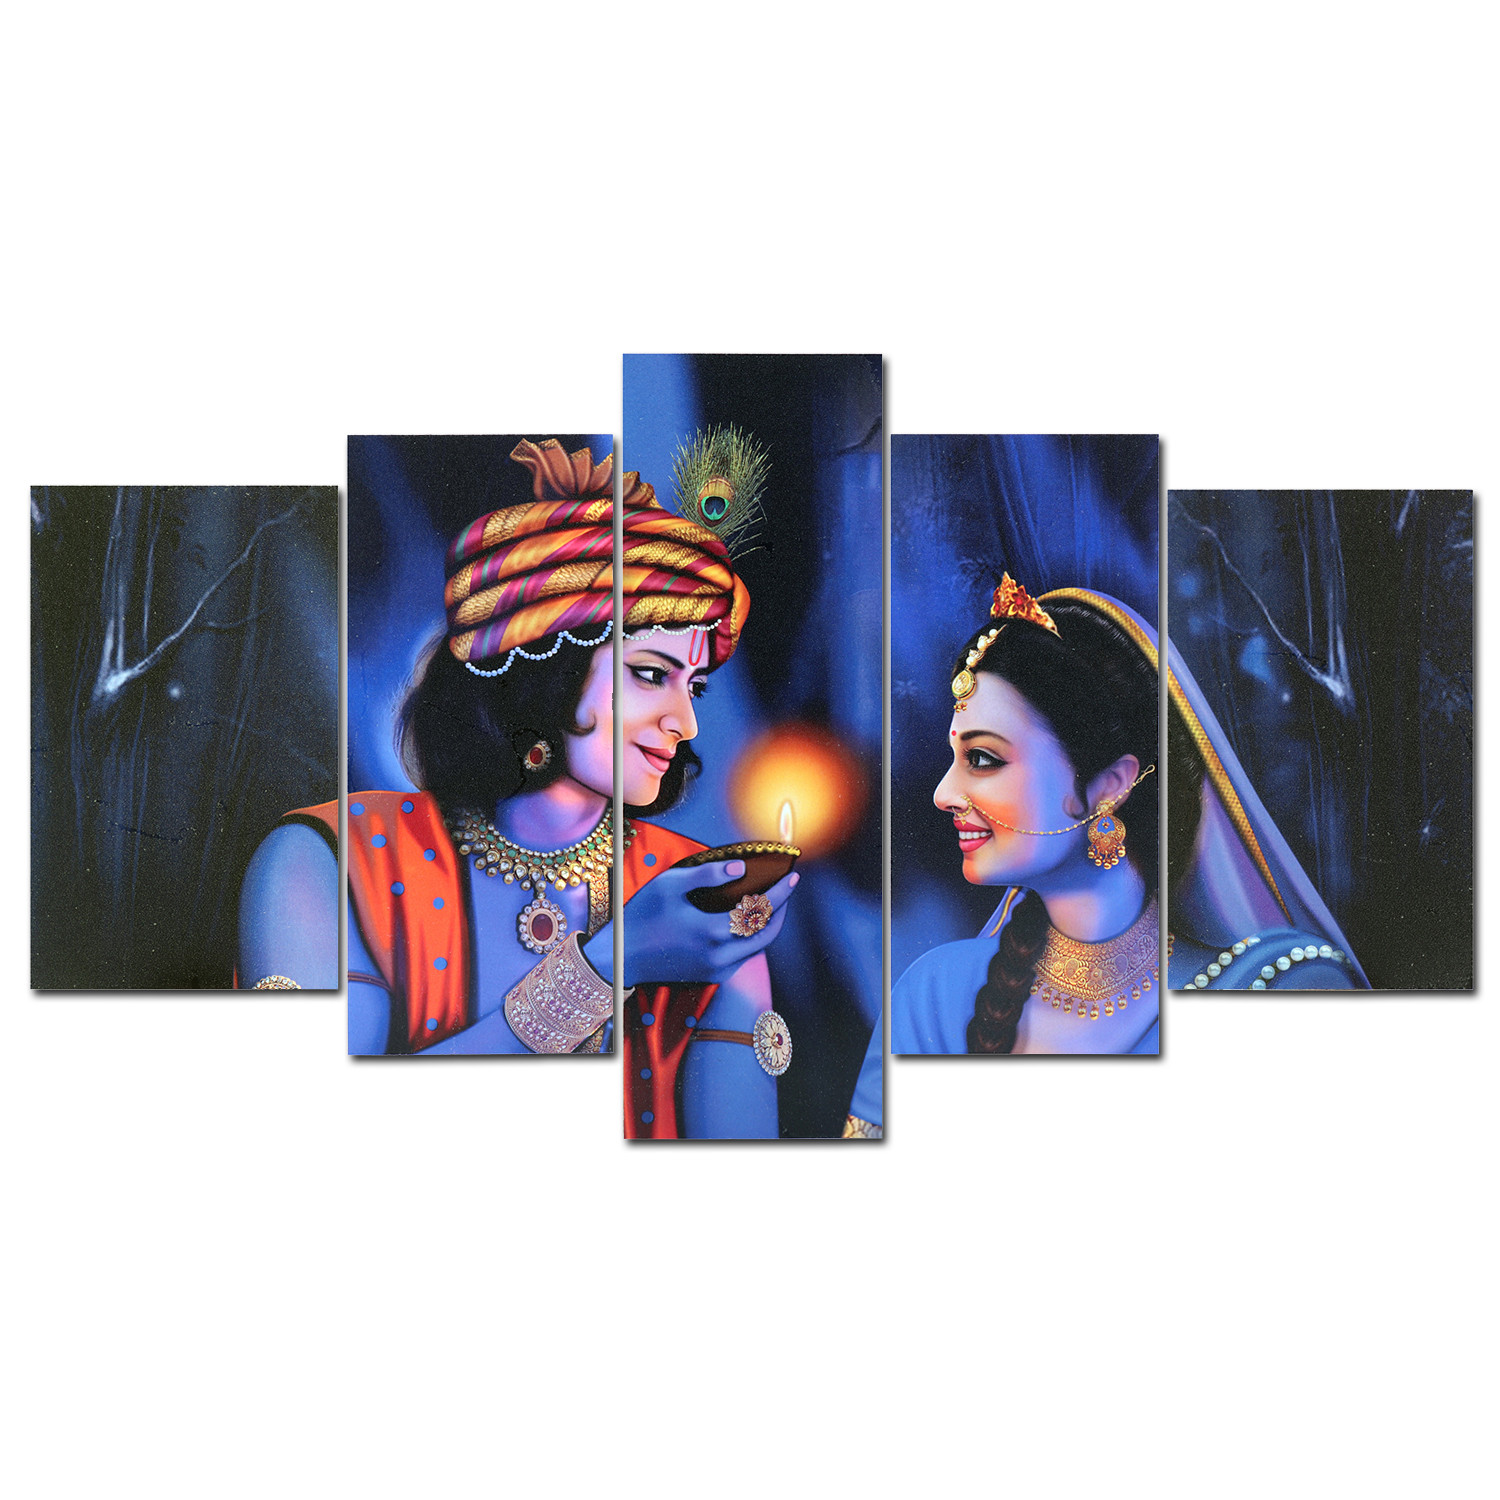 Kuber Industries Wall Paintings | MDF Wooden Wall Art for Living Room |Wall Sculpture | Radha-Krishna Painting for Bedroom | Office | Hotels | Gift | 1730KIK1| Blue